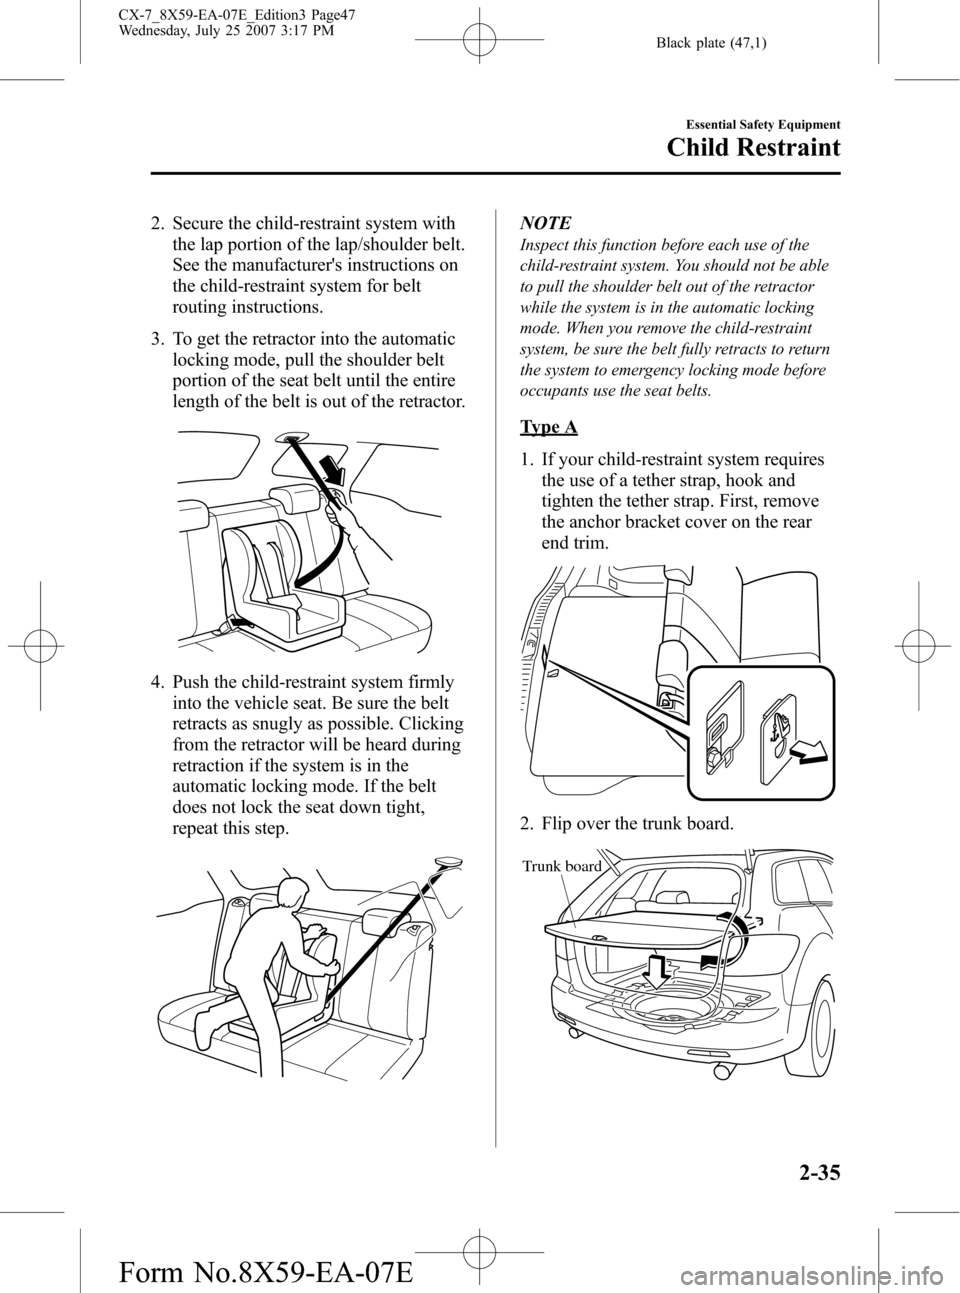 MAZDA MODEL CX-7 2008   (in English) Service Manual Black plate (47,1)
2. Secure the child-restraint system withthe lap portion of the lap/shoulder belt.
See the manufacturers instructions on
the child-restraint system for belt
routing instructions.
3